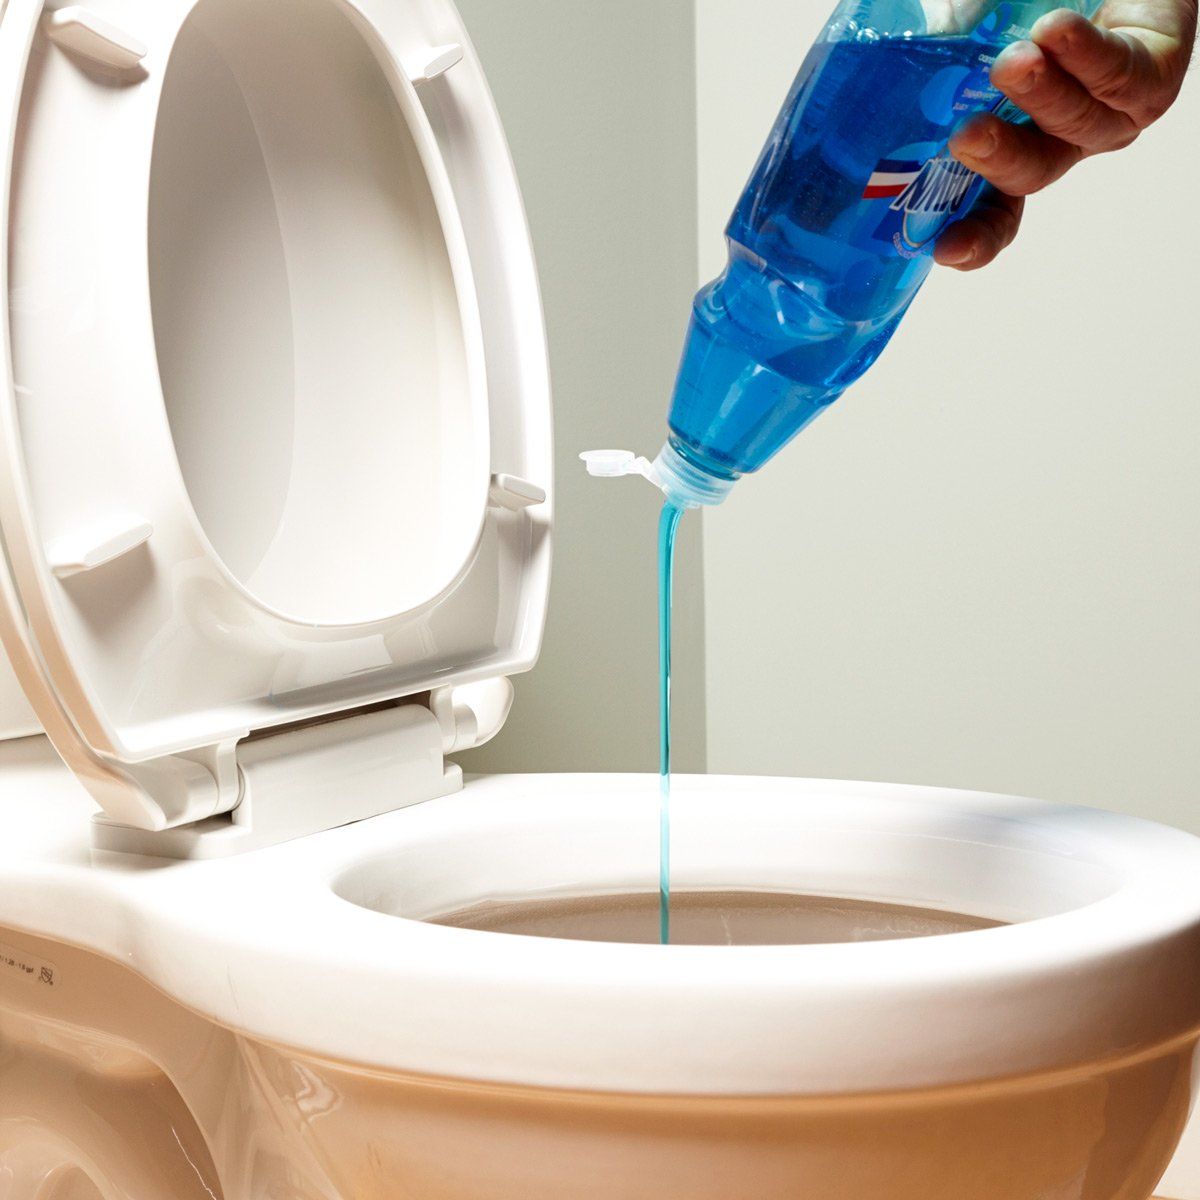 How To Unclog Toilet With Dish Soap